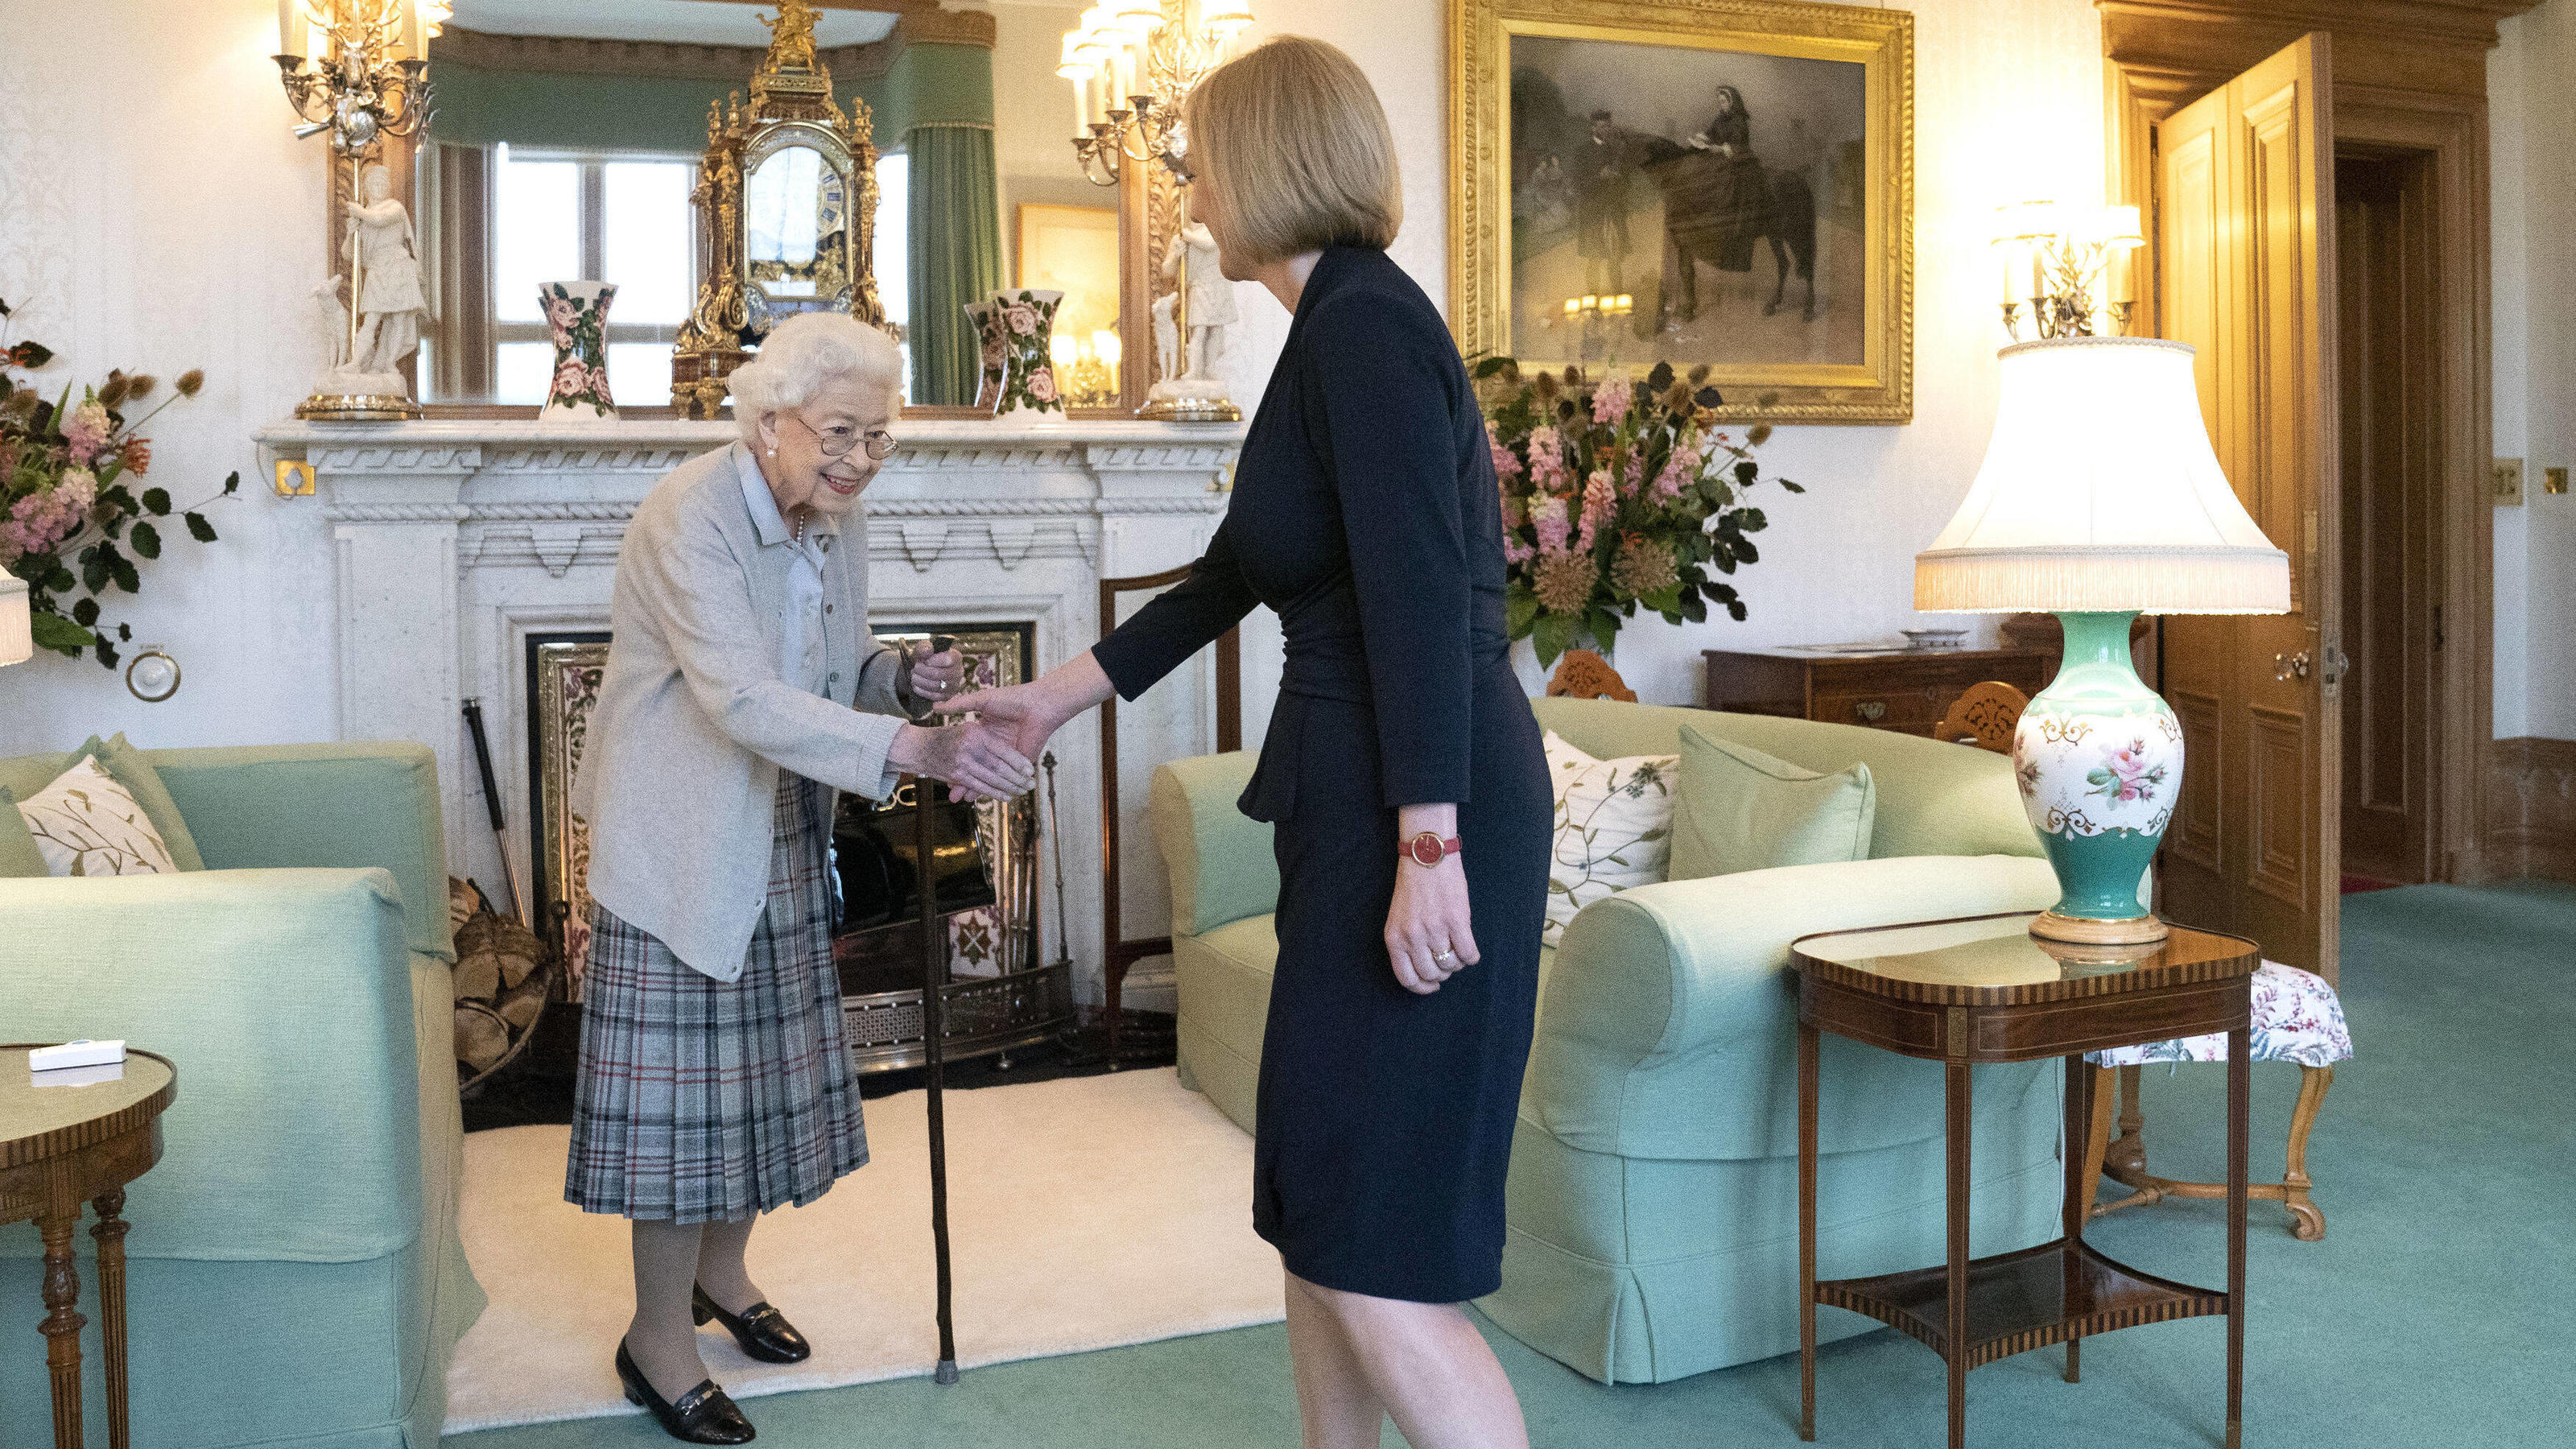  . 06/09/2022. Balmoral, United Kingdom. Queen Elizabeth II welcomes Liz Truss, during an audience at Balmoral, Scotland, where she invited the newly elected leader of the Conservative party to become the new Prime Minister of the United Kingdom. PUB